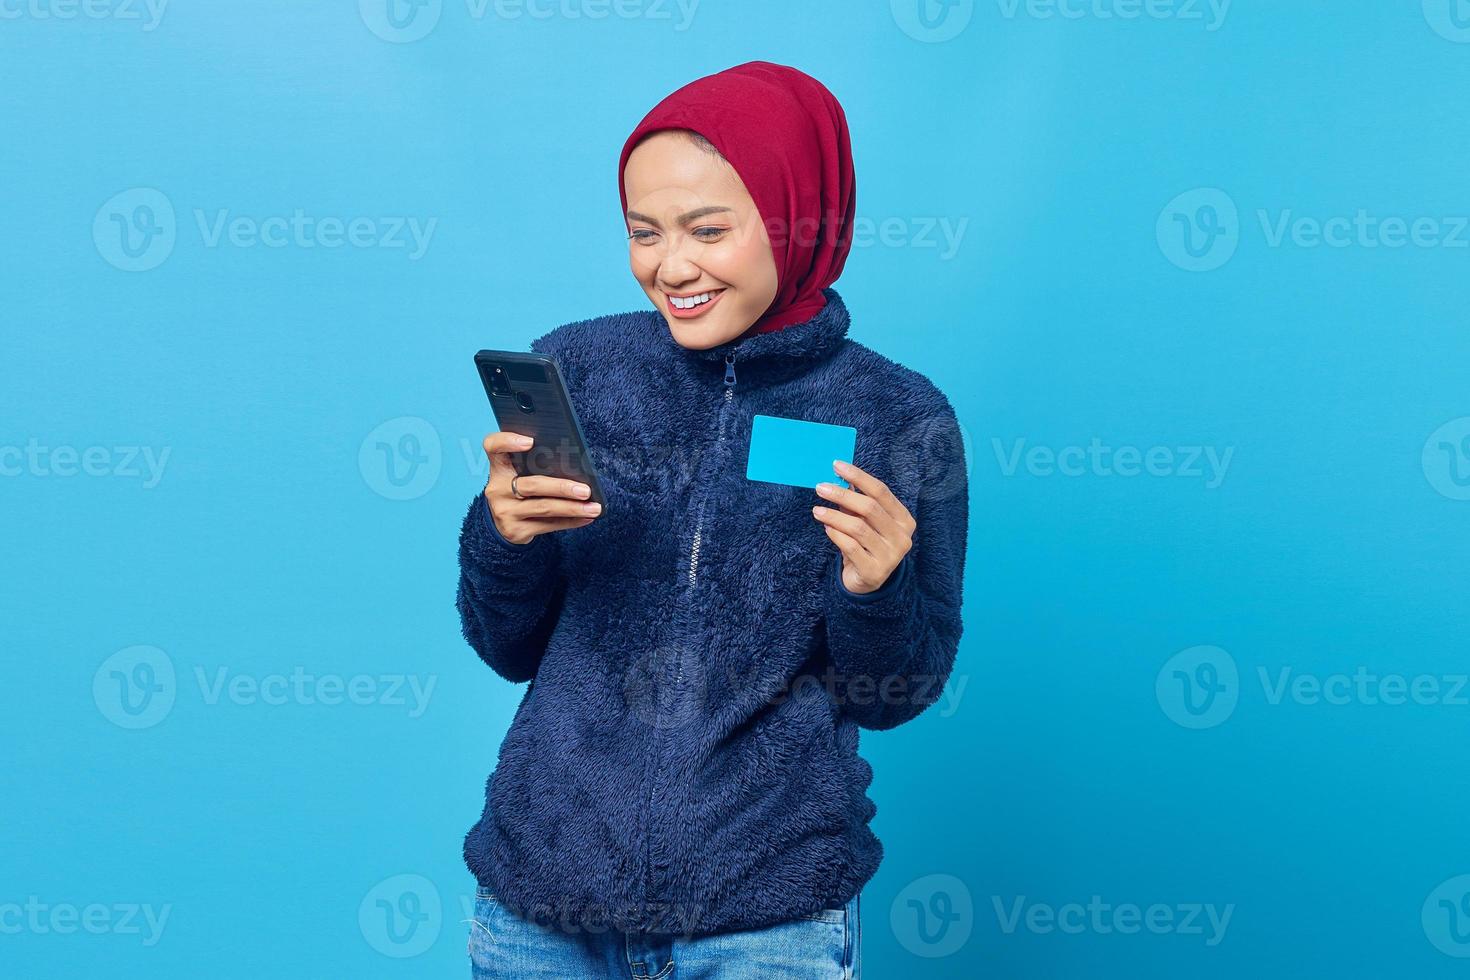 Cheerful young Asian woman holding mobile phone and showing credit card on blue background photo